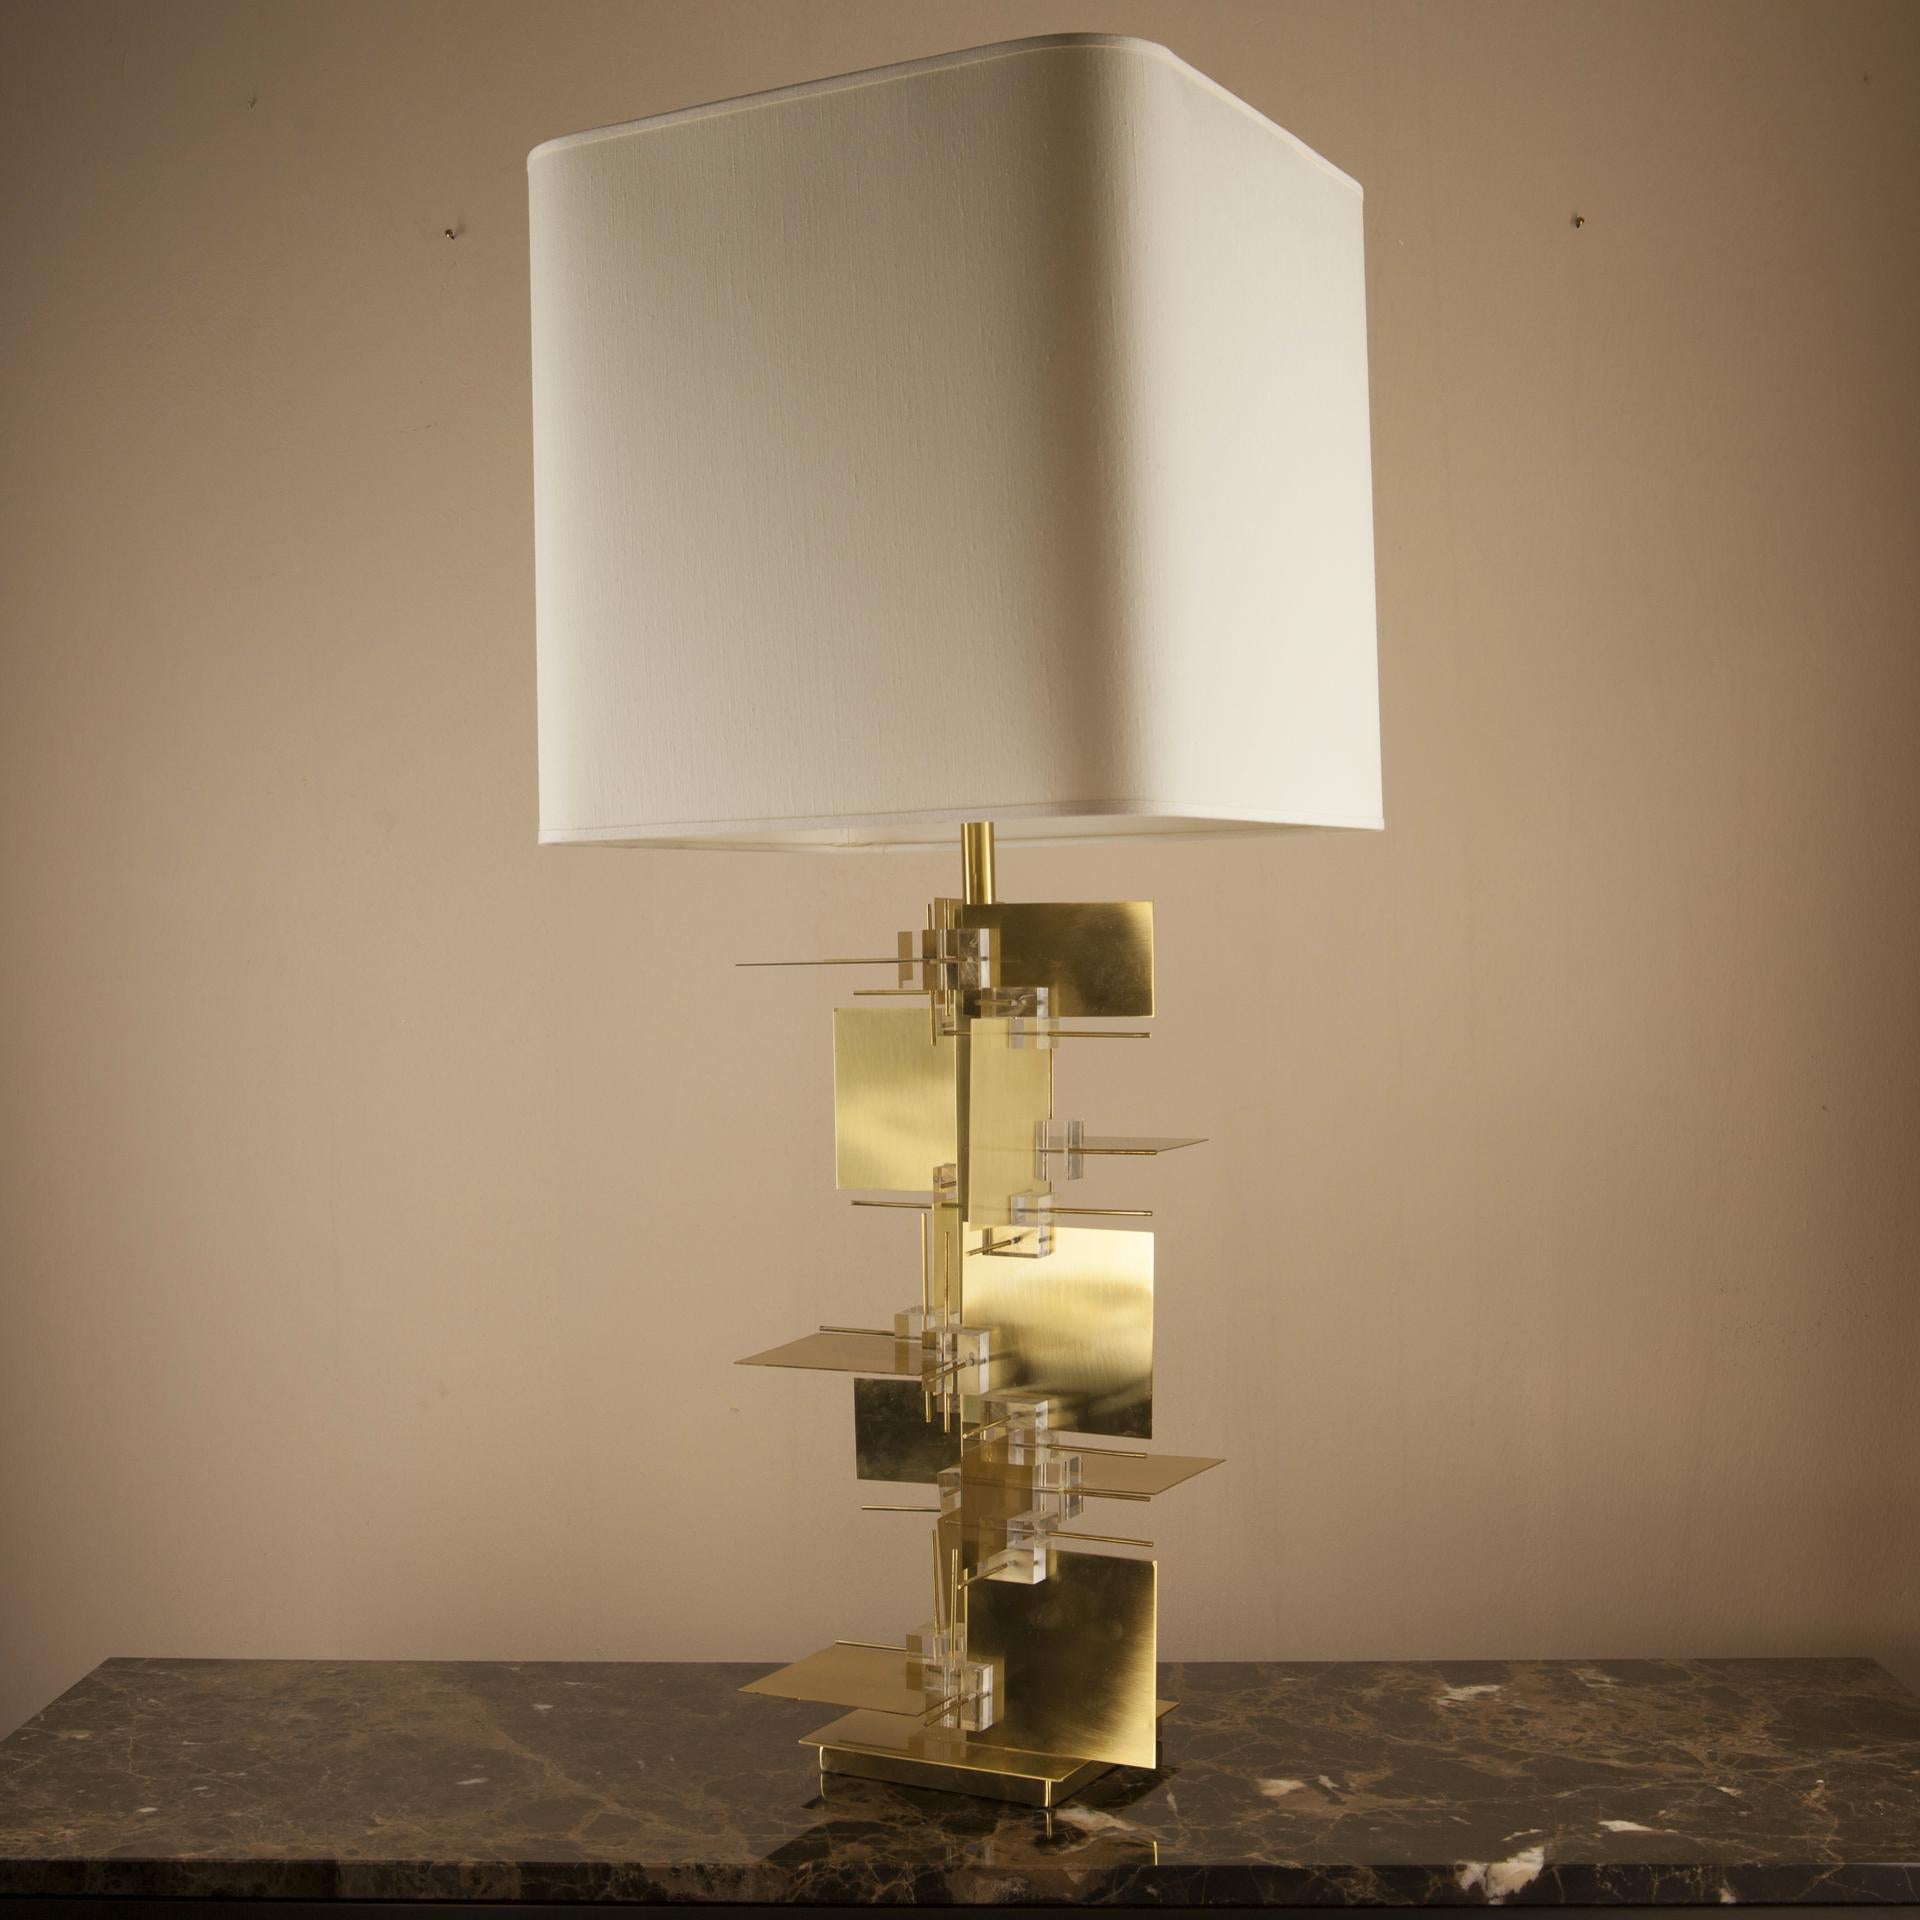 Piastrine table lamp from Selezioni Domus, Florence
Imposing table lamp with twin sockets. All in solid brass to create a captivating sculptural lamp body and a great play with the light.

Selezioni Domus Firenze reference: //